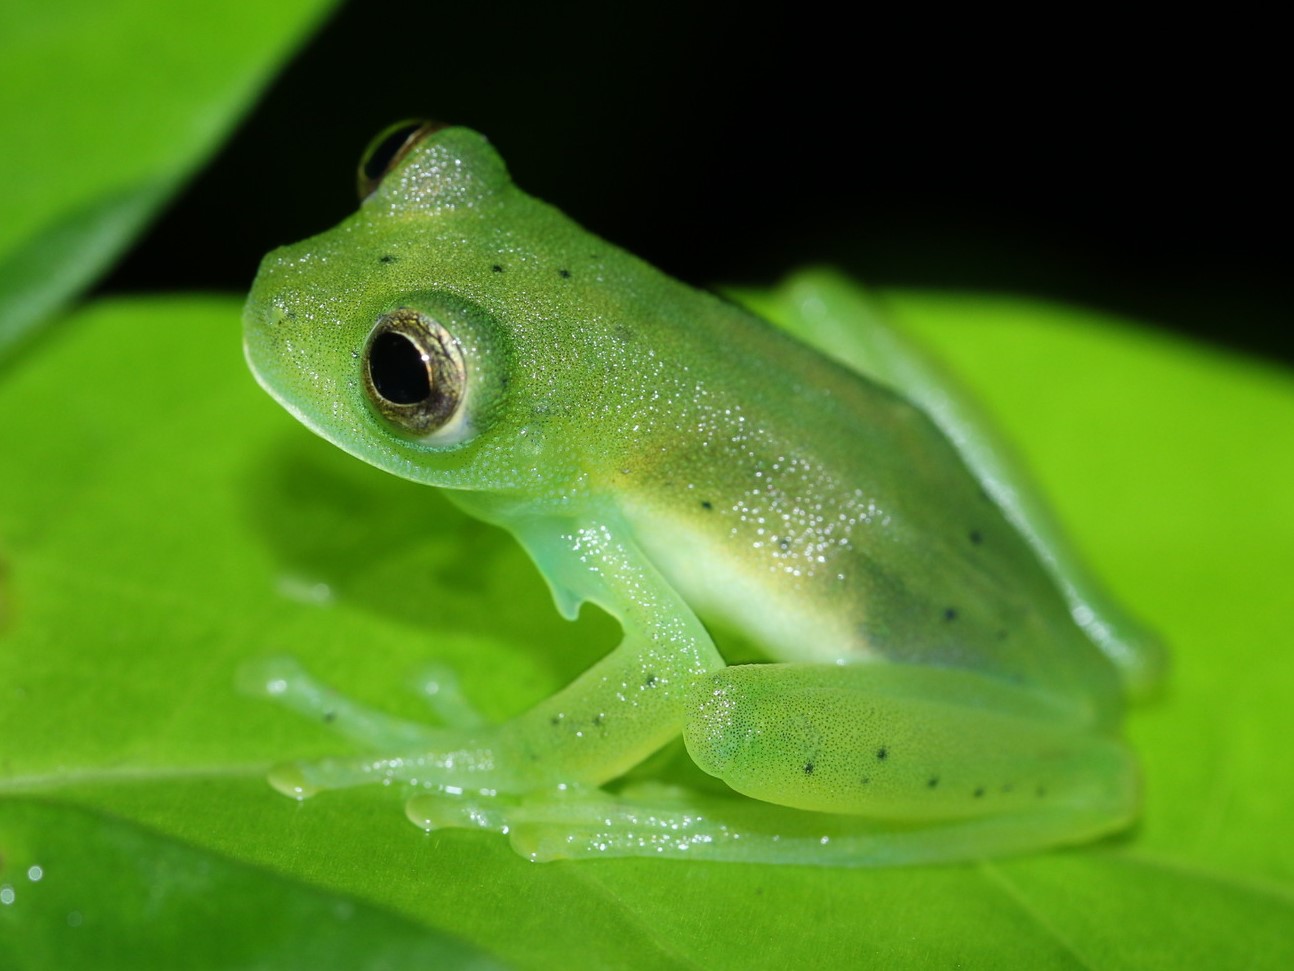 Andes giant glass frog sitting on a leaf